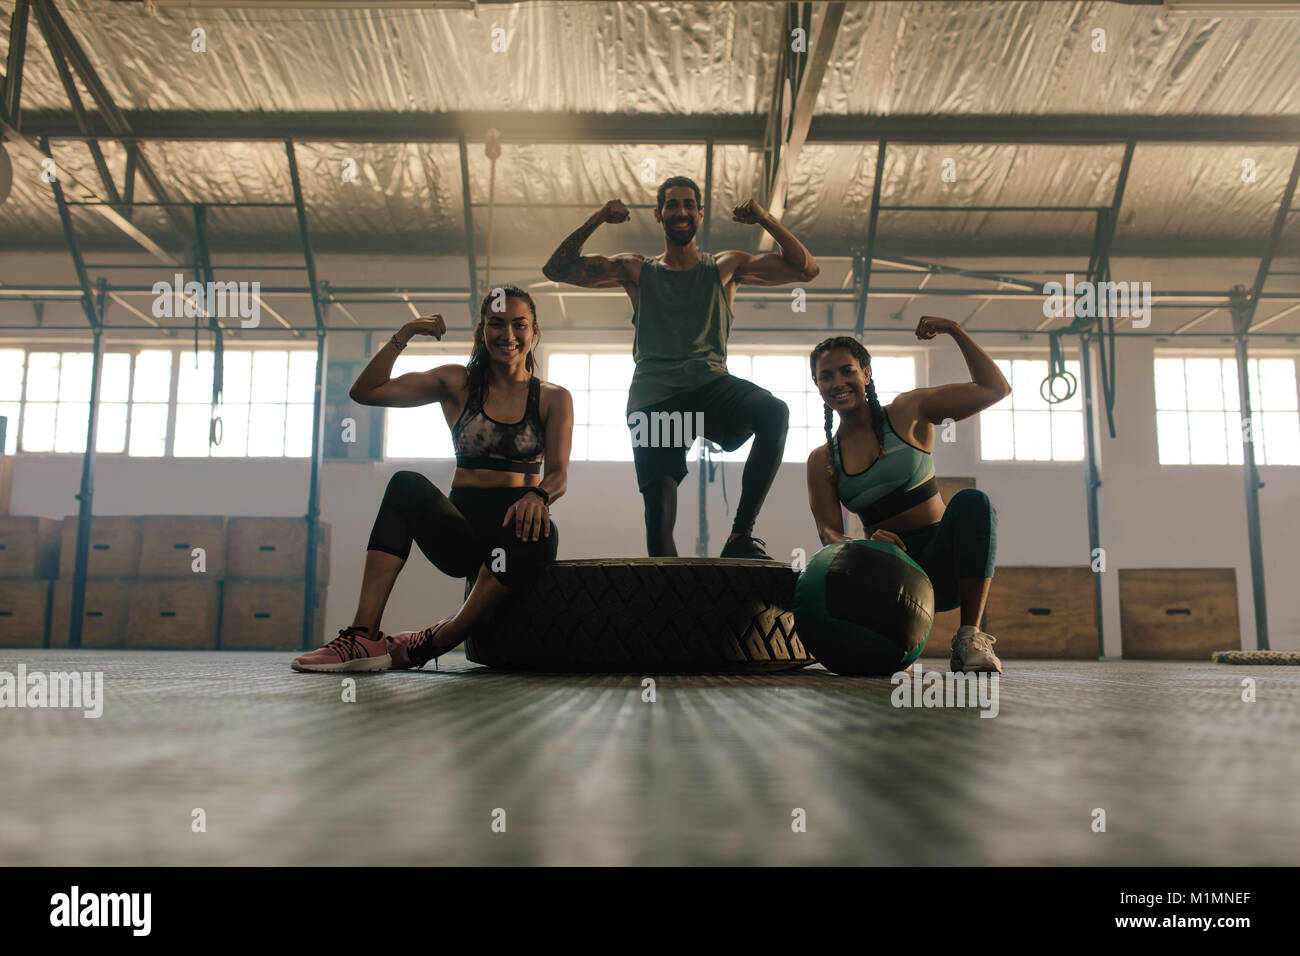 Young people posing and flexing their muscles in gym. Group of people at gym showing their muscular biceps and  smiling. Stock Photo